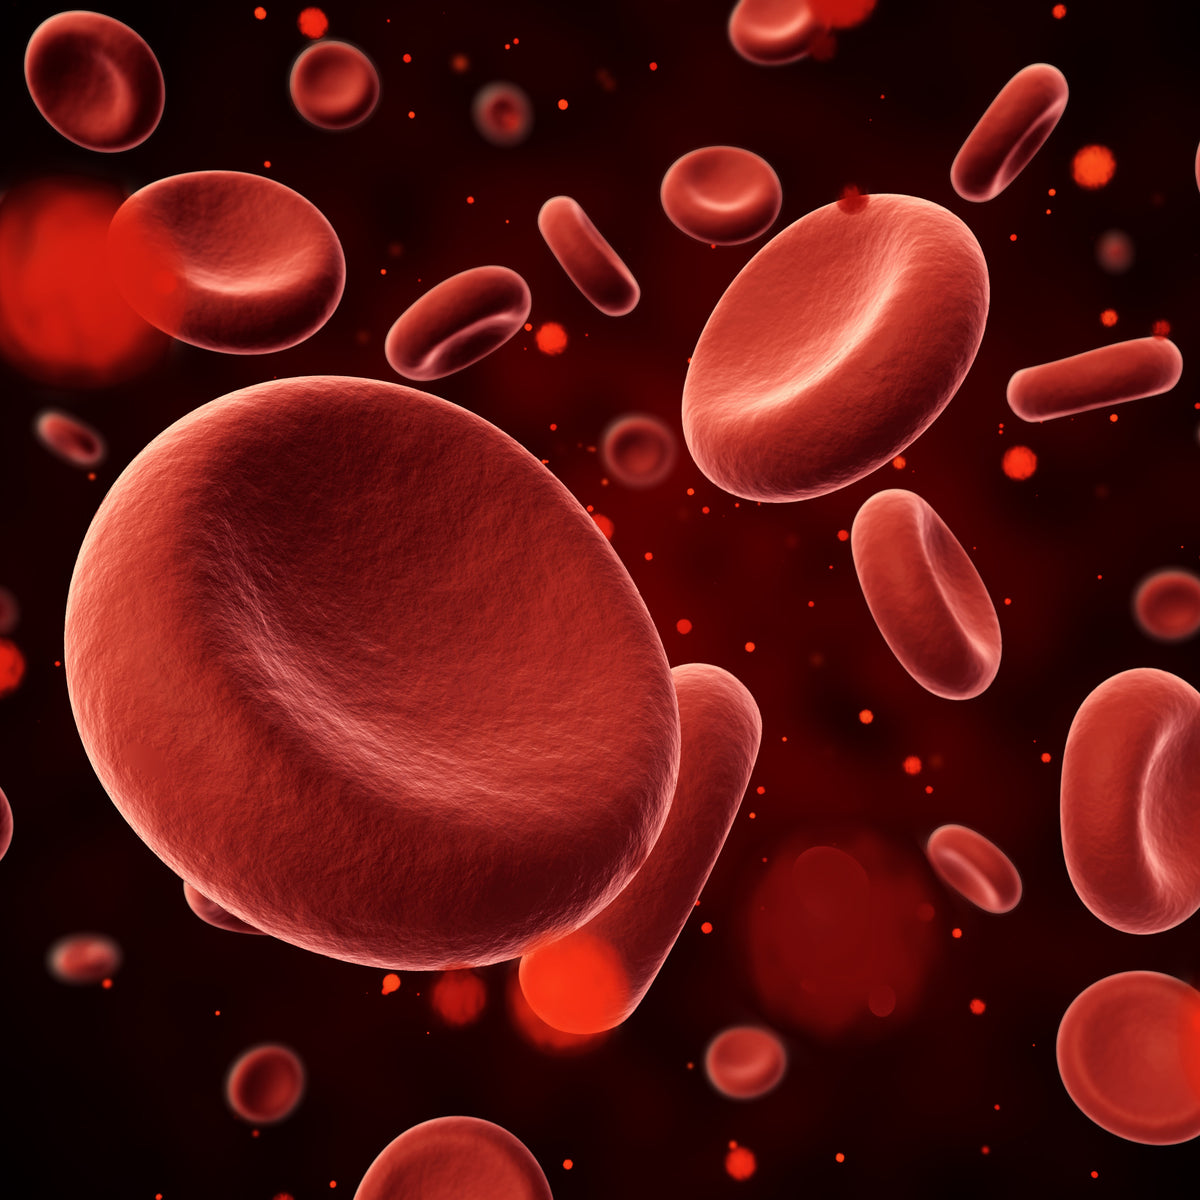 A graphic of blood cells